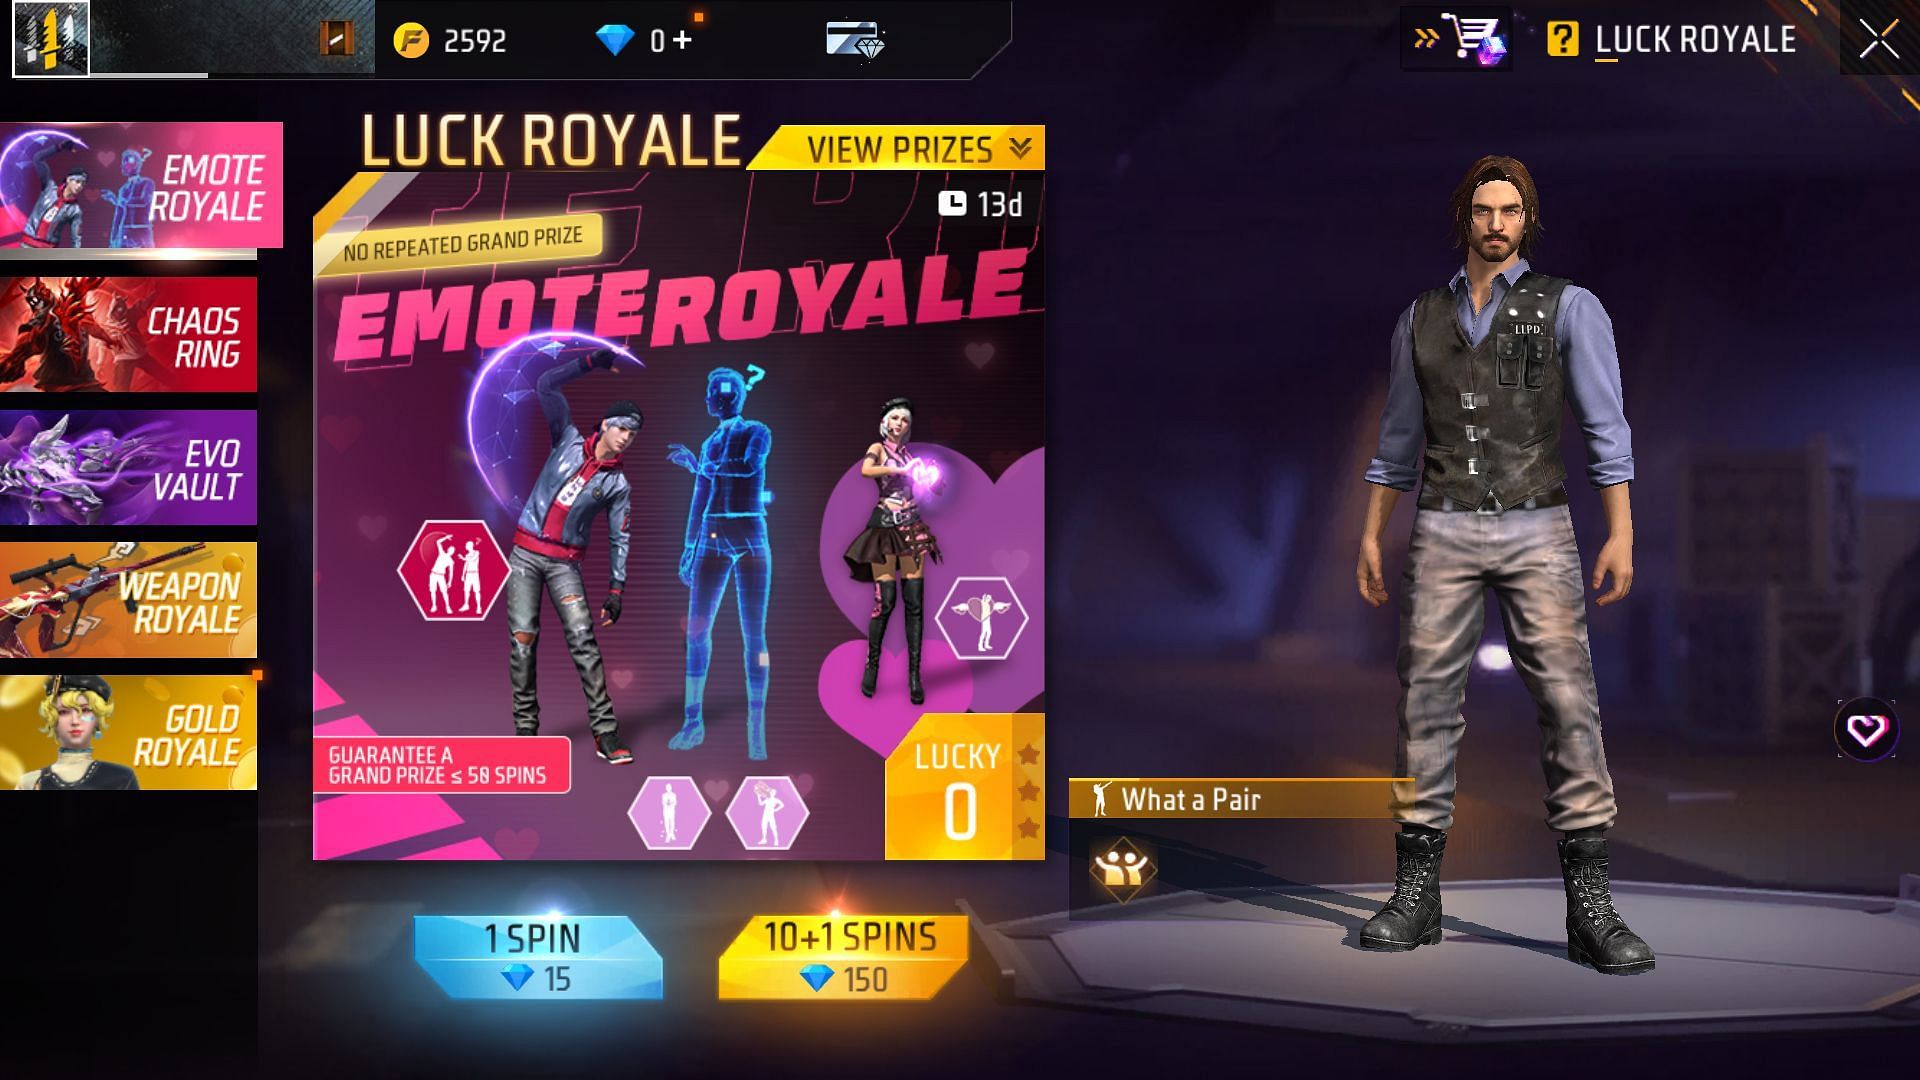 The new Luck Royale event is set to function for a period of two weeks (Image via Garena)